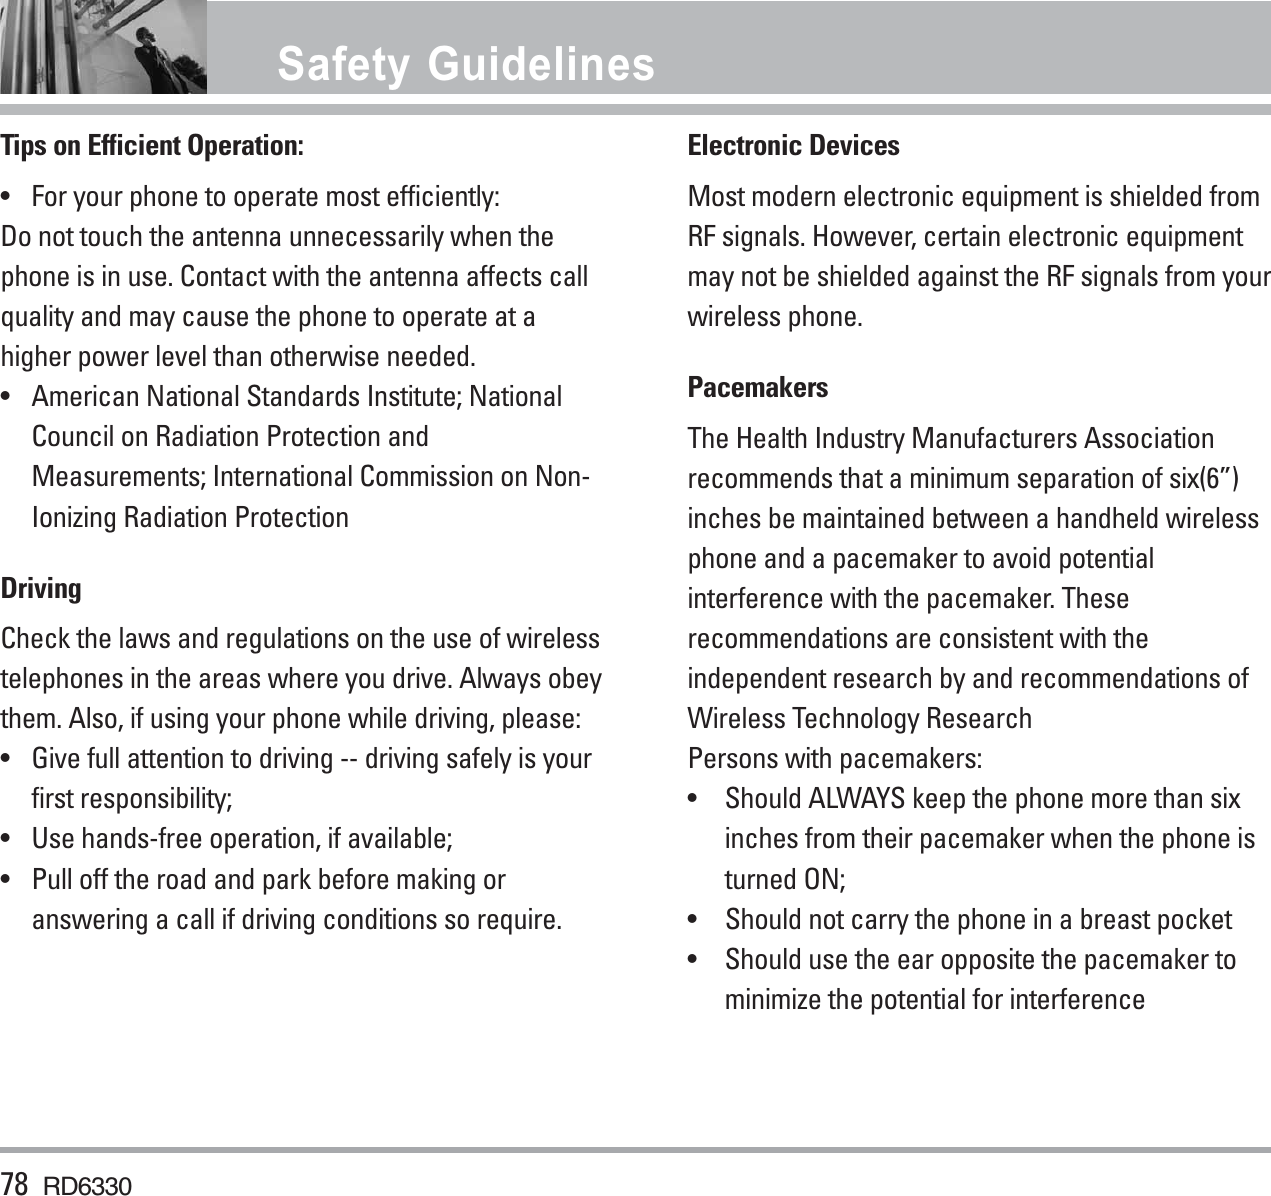 Tips on Efficient Operation:•  For your phone to operate most efficiently:Do not touch the antenna unnecessarily when thephone is in use. Contact with the antenna affects callquality and may cause the phone to operate at ahigher power level than otherwise needed.• American National Standards Institute; NationalCouncil on Radiation Protection andMeasurements; International Commission on Non-Ionizing Radiation ProtectionDrivingCheck the laws and regulations on the use of wirelesstelephones in the areas where you drive. Always obeythem. Also, if using your phone while driving, please:•  Give full attention to driving -- driving safely is yourfirst responsibility;•  Use hands-free operation, if available;•  Pull off the road and park before making oranswering a call if driving conditions so require.Electronic DevicesMost modern electronic equipment is shielded fromRF signals. However, certain electronic equipmentmay not be shielded against the RF signals from yourwireless phone.PacemakersThe Health Industry Manufacturers Associationrecommends that a minimum separation of six(6”)inches be maintained between a handheld wirelessphone and a pacemaker to avoid potentialinterference with the pacemaker. Theserecommendations are consistent with theindependent research by and recommendations ofWireless Technology ResearchPersons with pacemakers:• Should ALWAYS keep the phone more than sixinches from their pacemaker when the phone isturned ON;• Should not carry the phone in a breast pocket• Should use the ear opposite the pacemaker tominimize the potential for interference78 RD6330Safety Guidelines